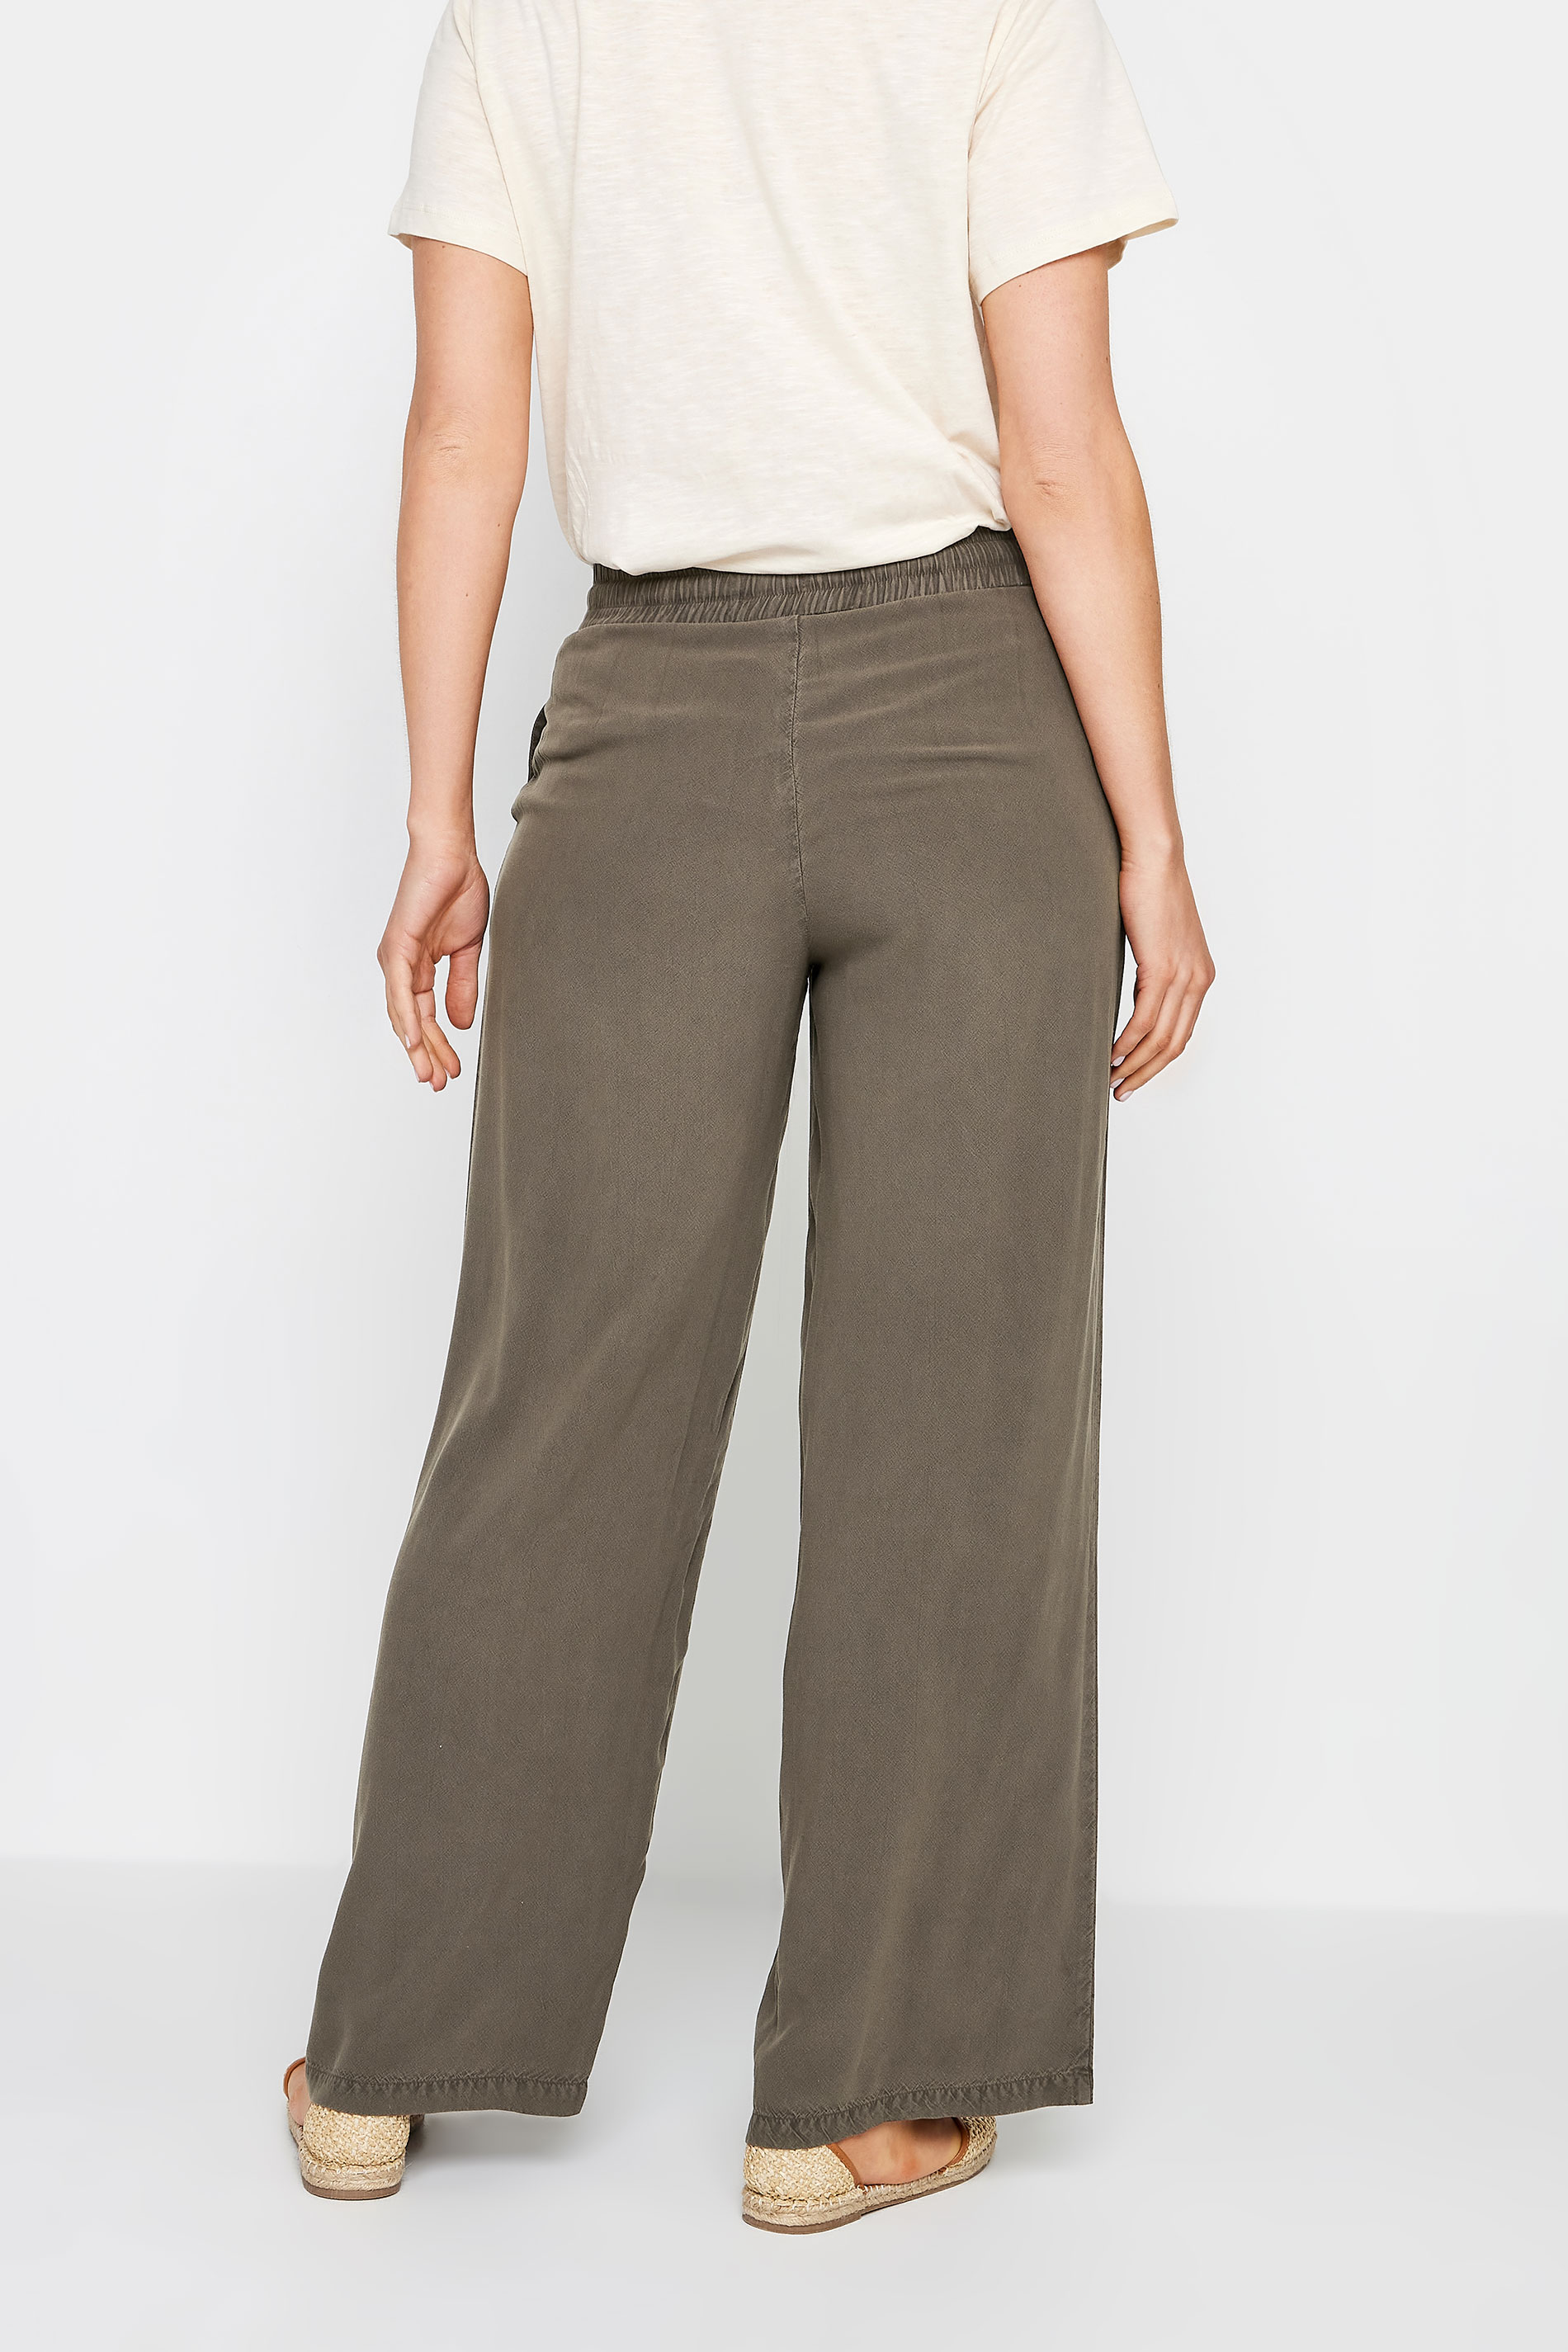 LTS Tall Womens Chocolate Brown Acid Wash Wide Leg Trousers | Long Tall Sally 3